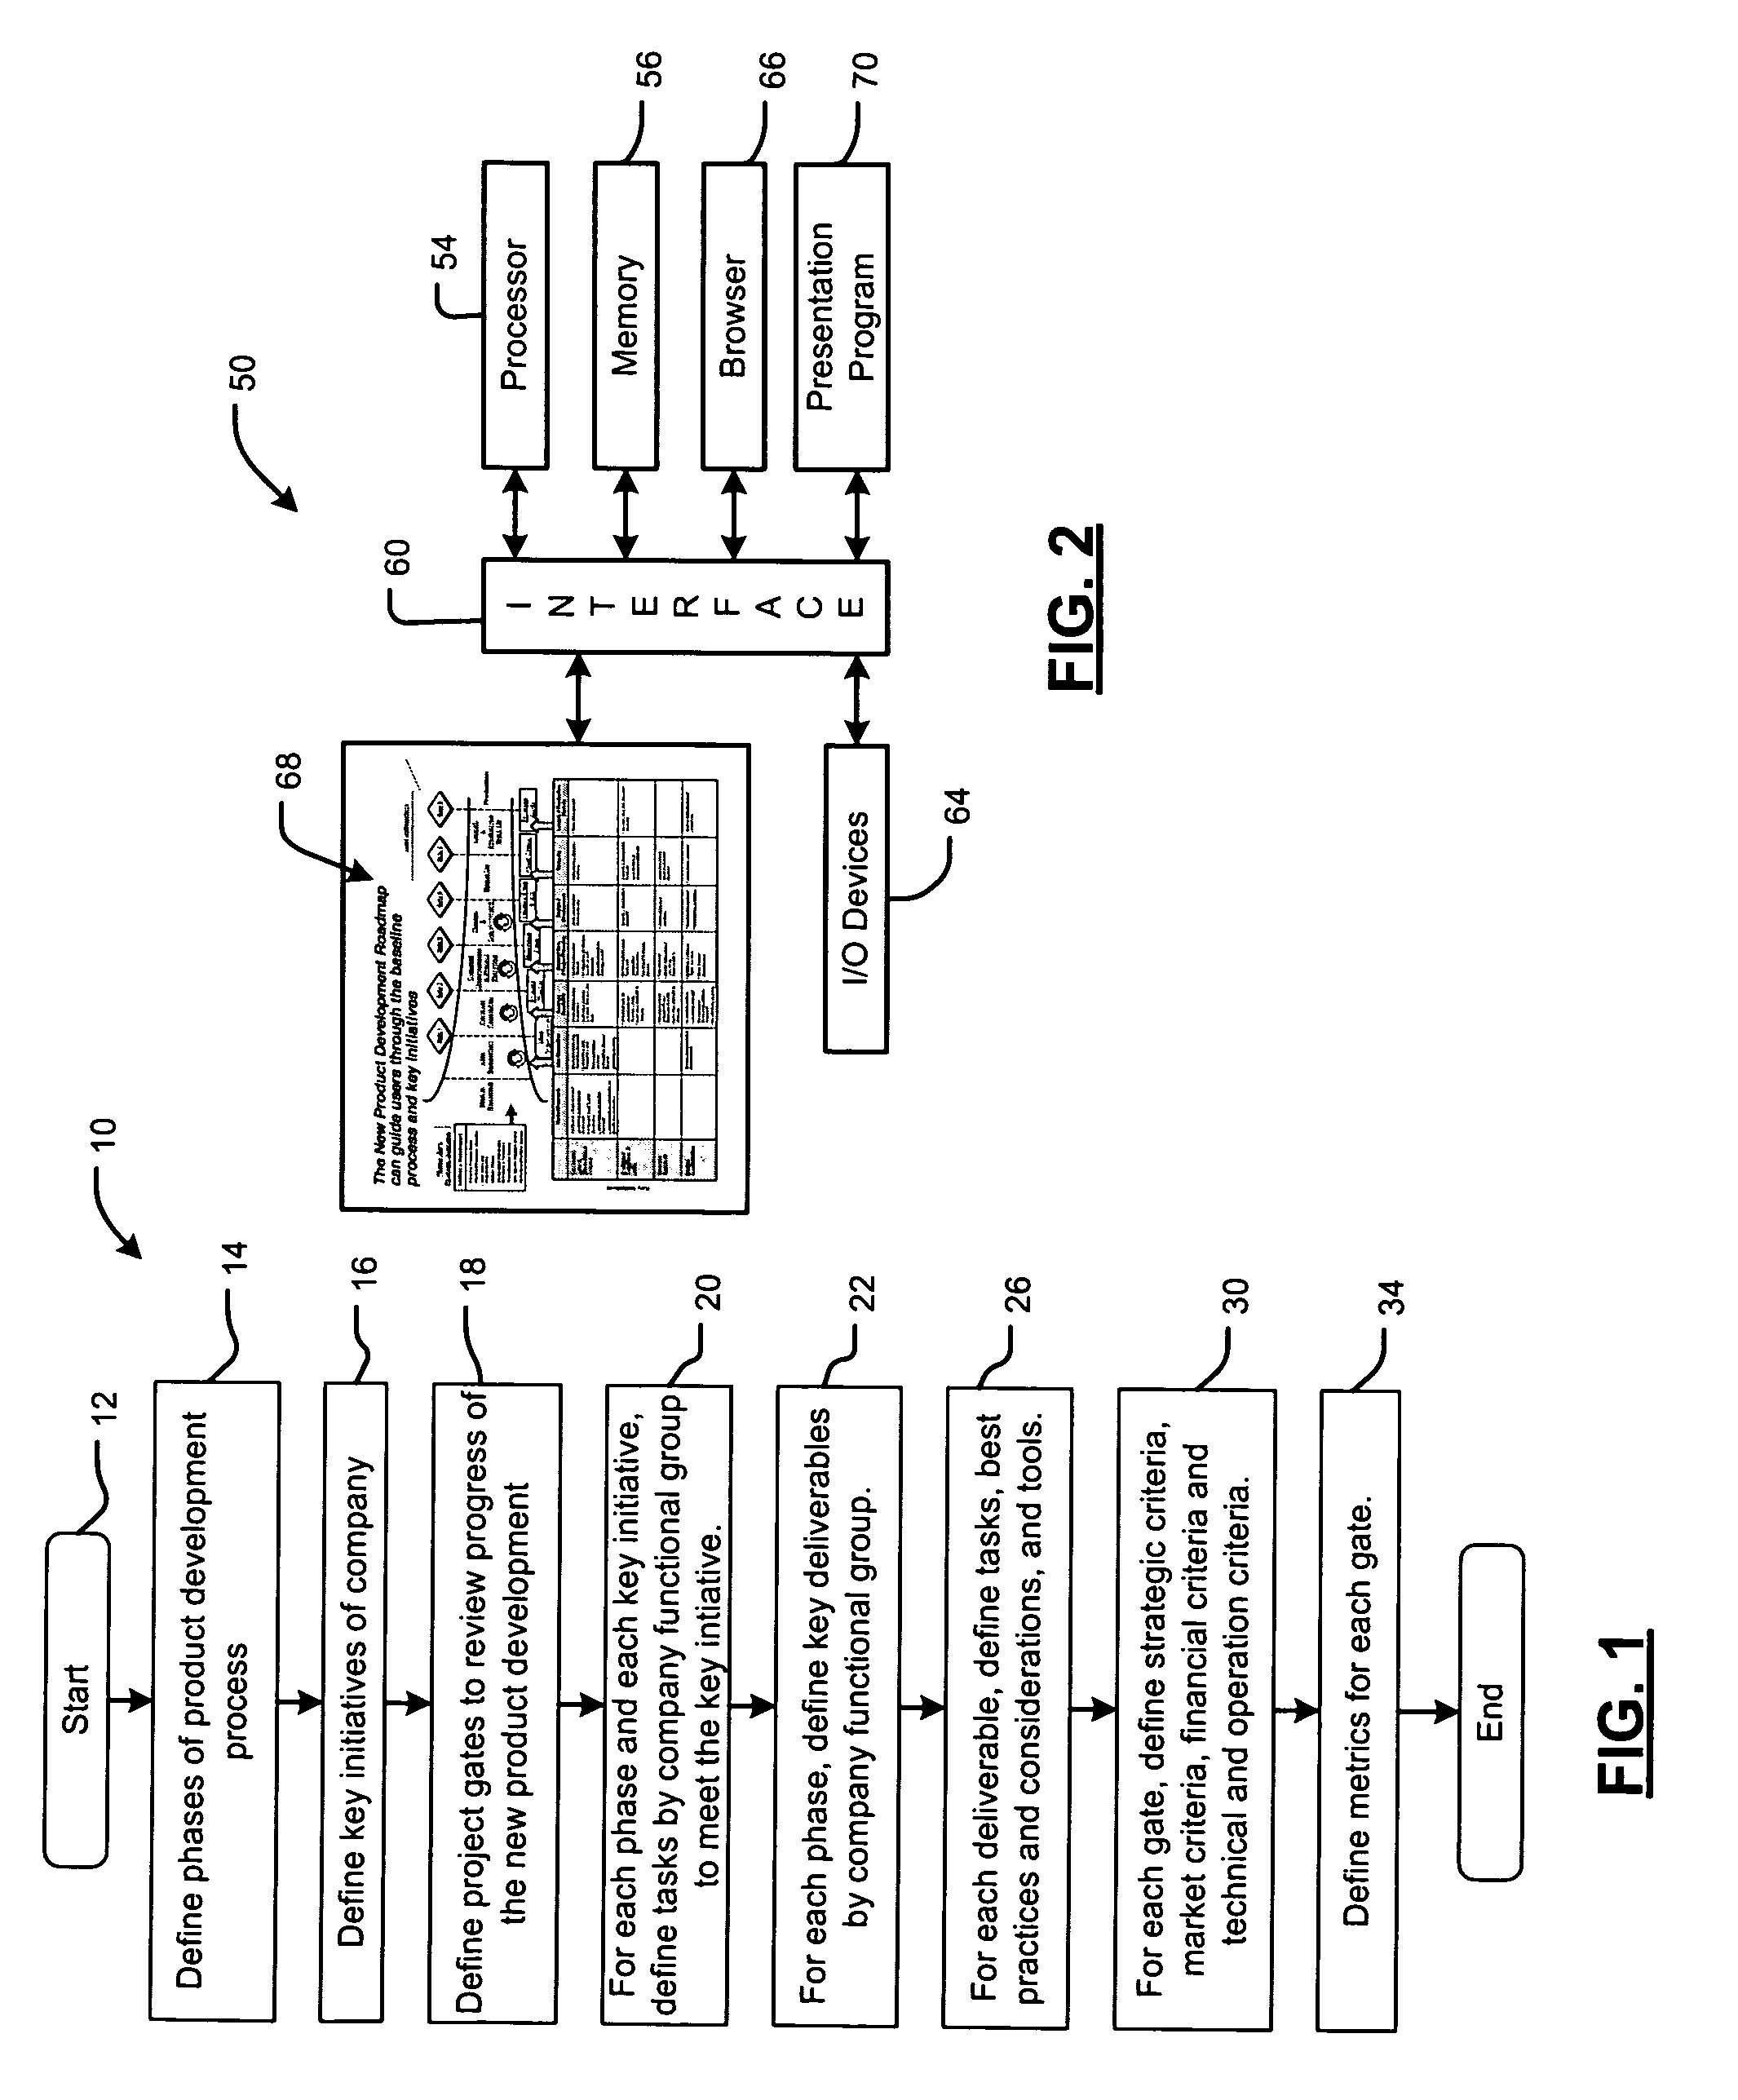 Systems and methods for improving product development processes